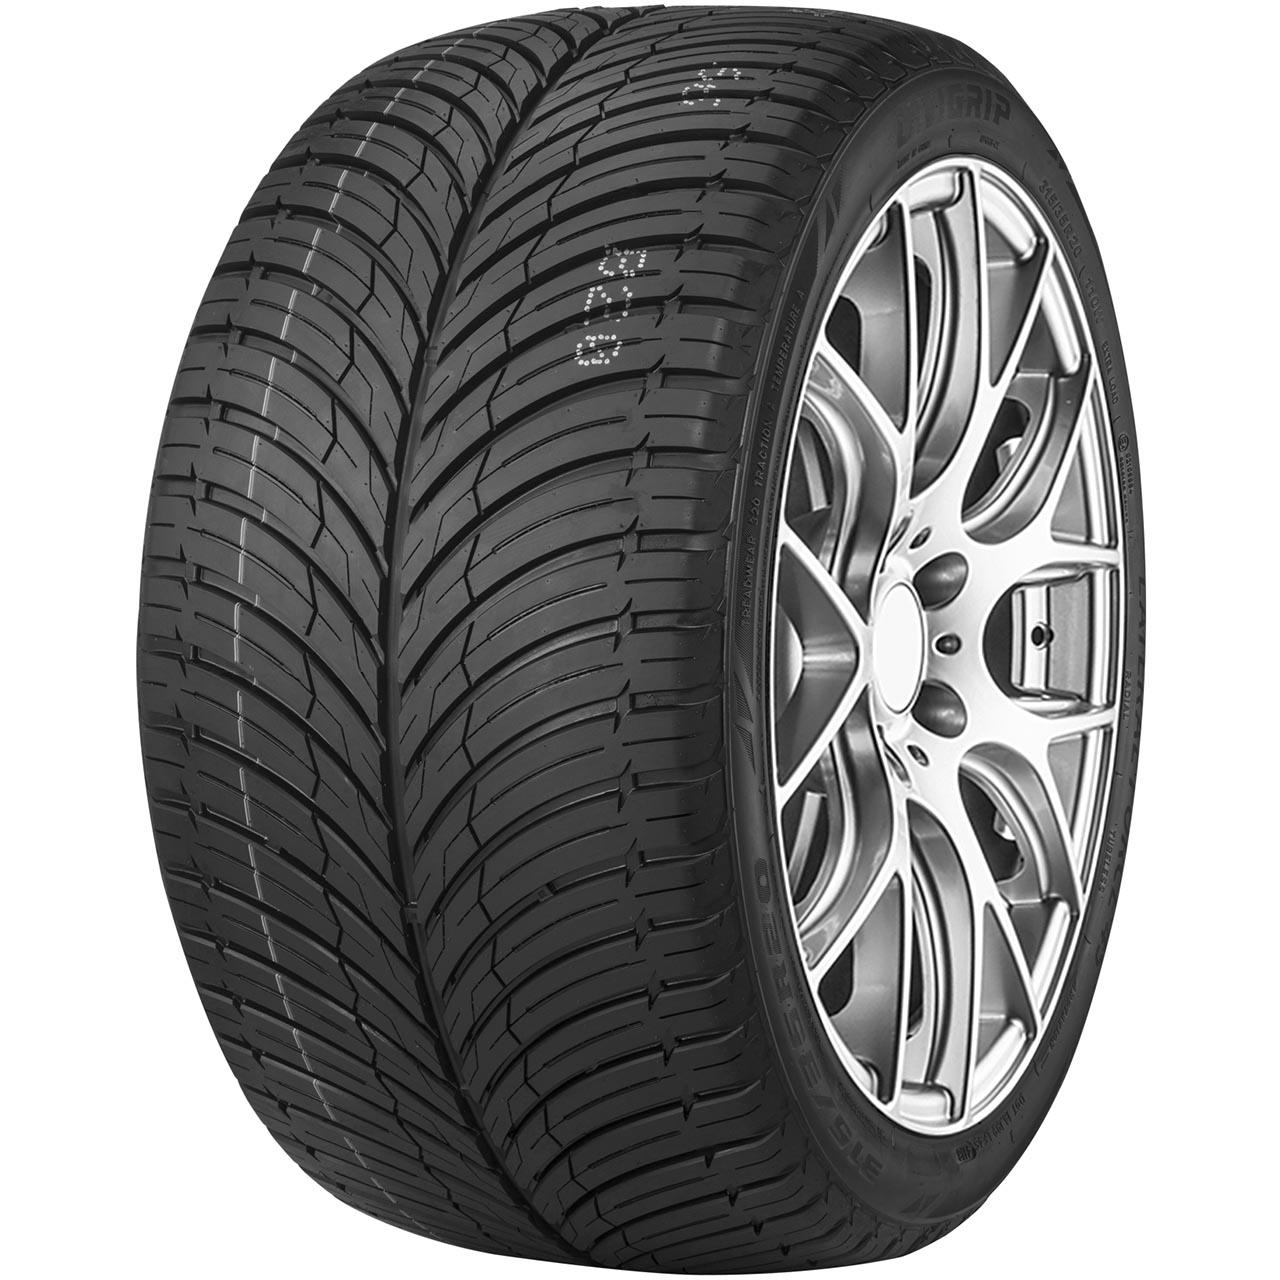 Unigrip Lateral Force 4S 255/60R18 112V XL